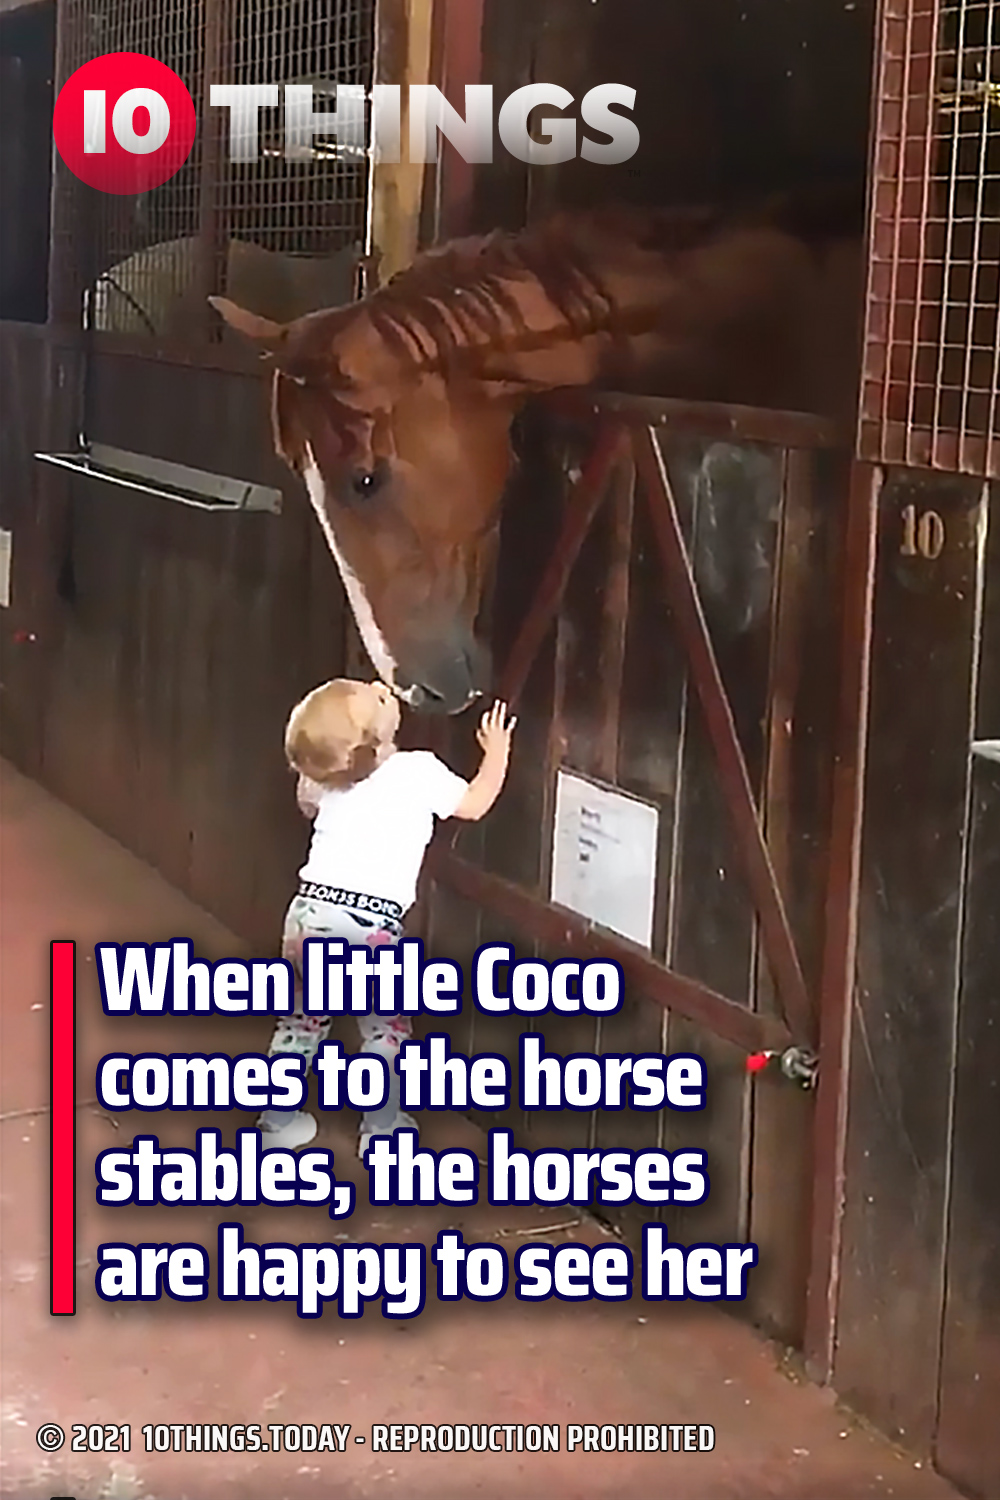 When little Coco comes to the horse stables, the horses are happy to see her